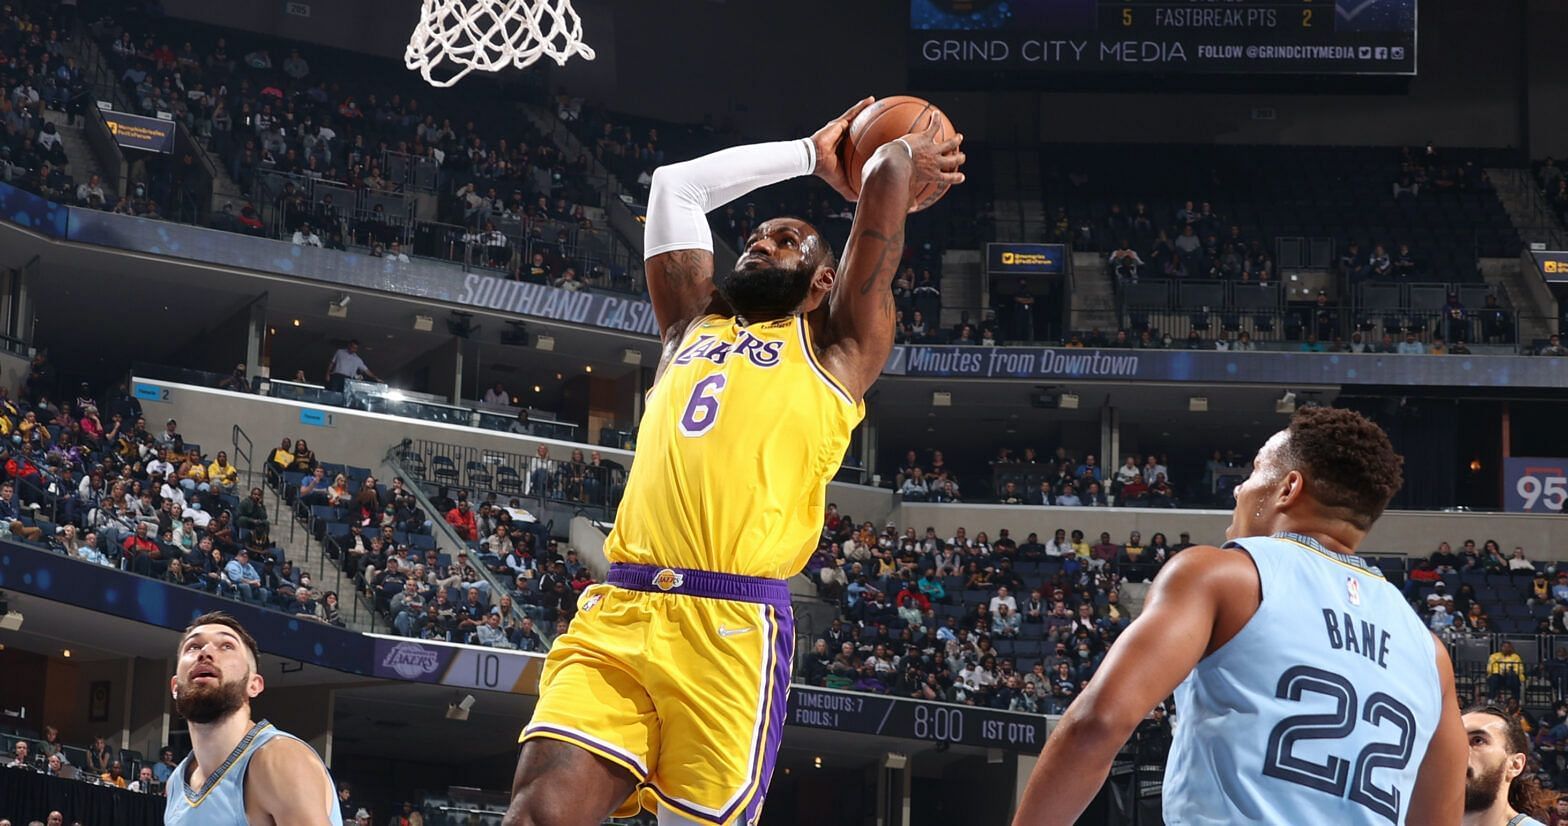 LeBron James playing center has made the LA Lakers&#039; offense more fluid. [Photo: NBA.com]